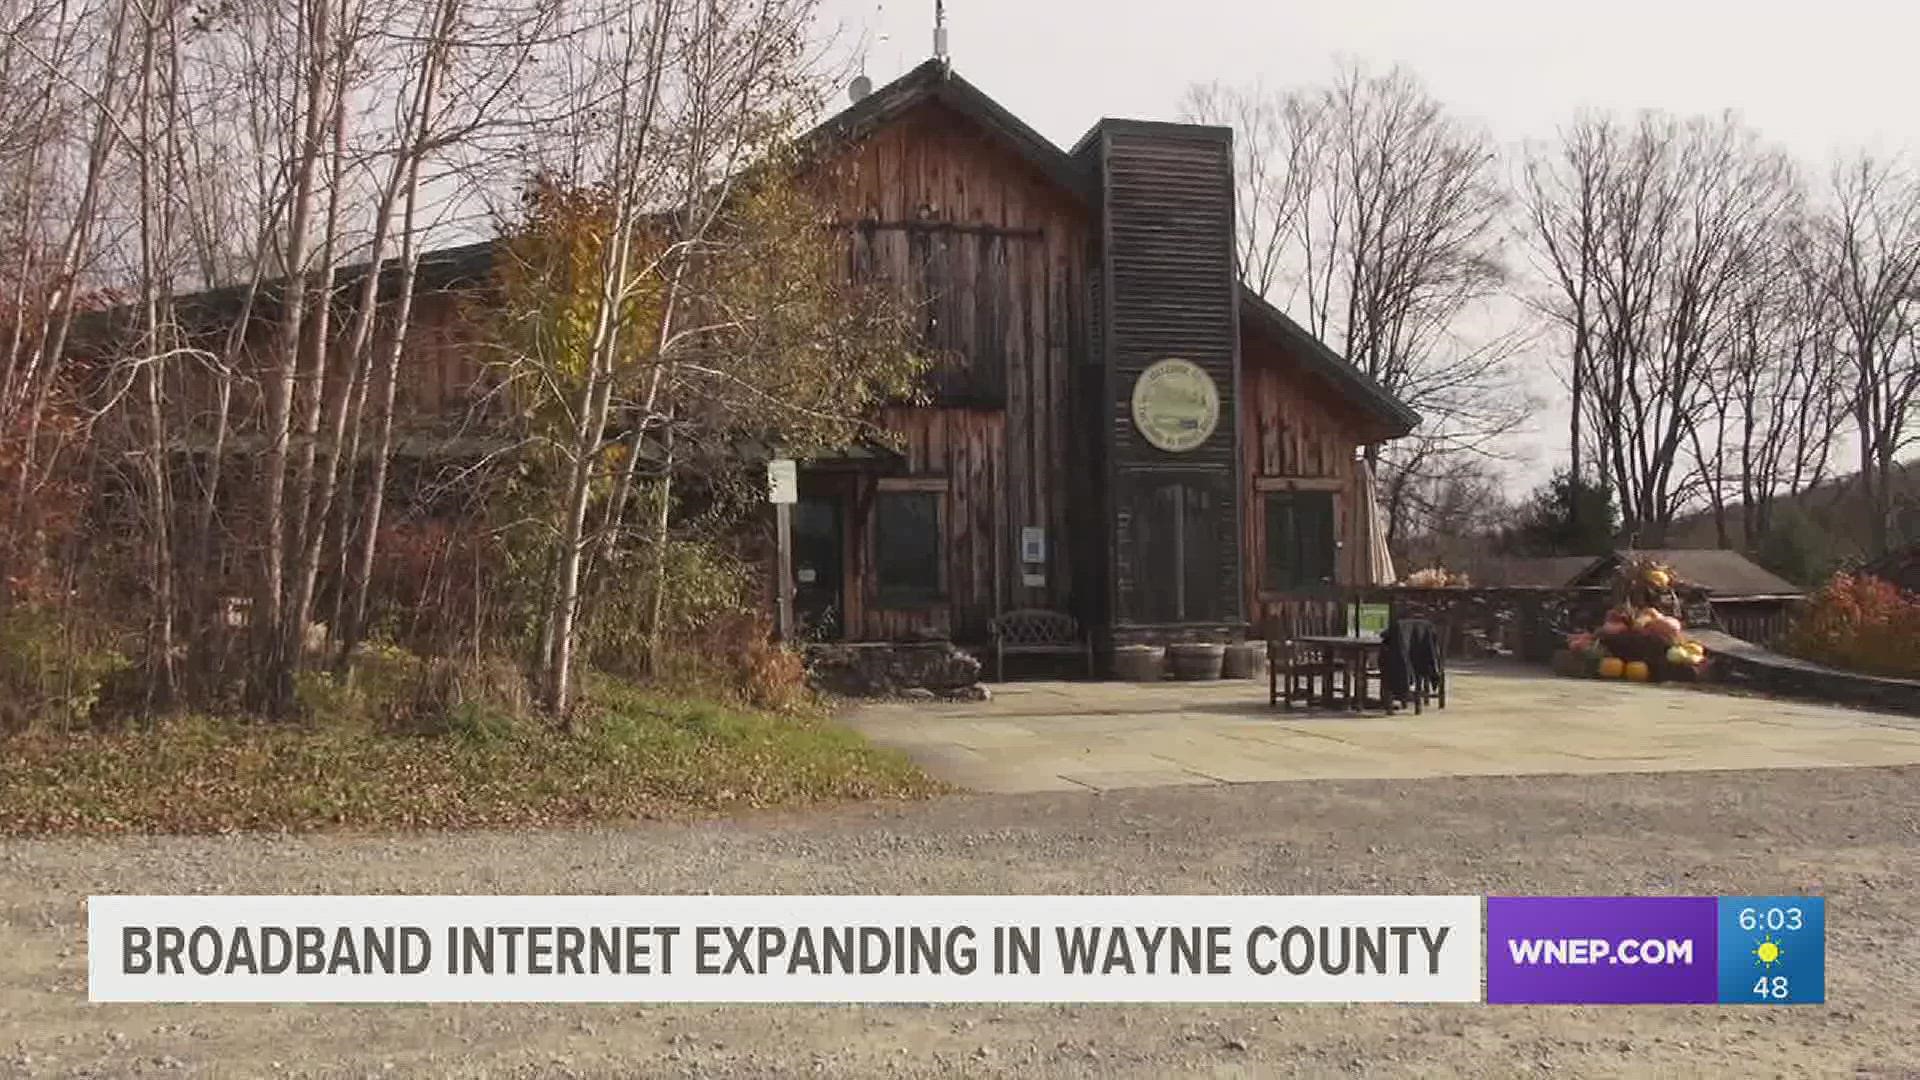 If you live in a rural area you know getting internet service isn't easy and one company is working on changing that in Wayne County.